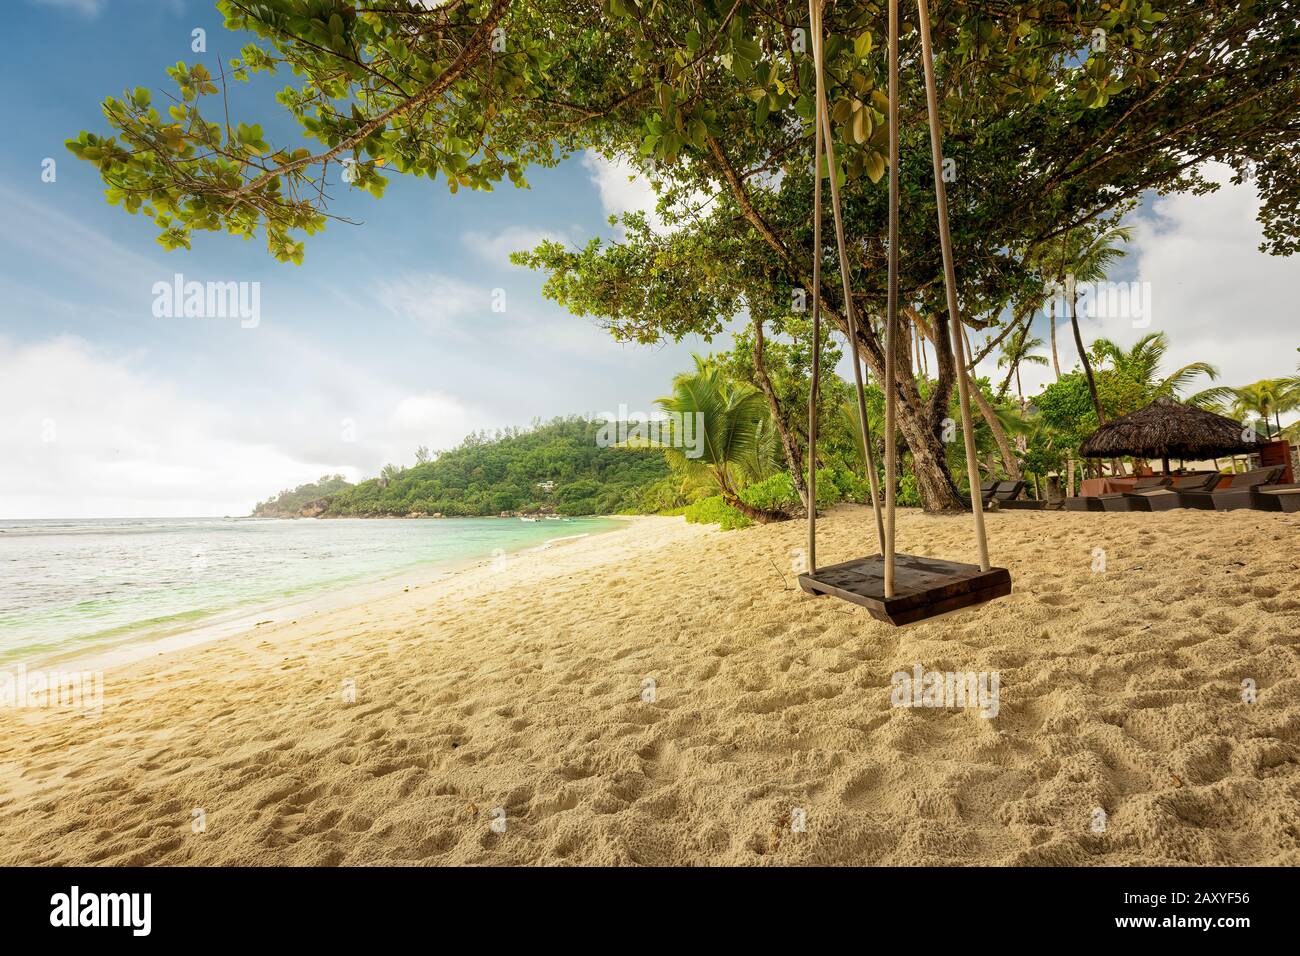 Rope swing swings on a tropical beach. Exotic palm trees and blue sky. Holiday serenity vacation concept Stock Photo